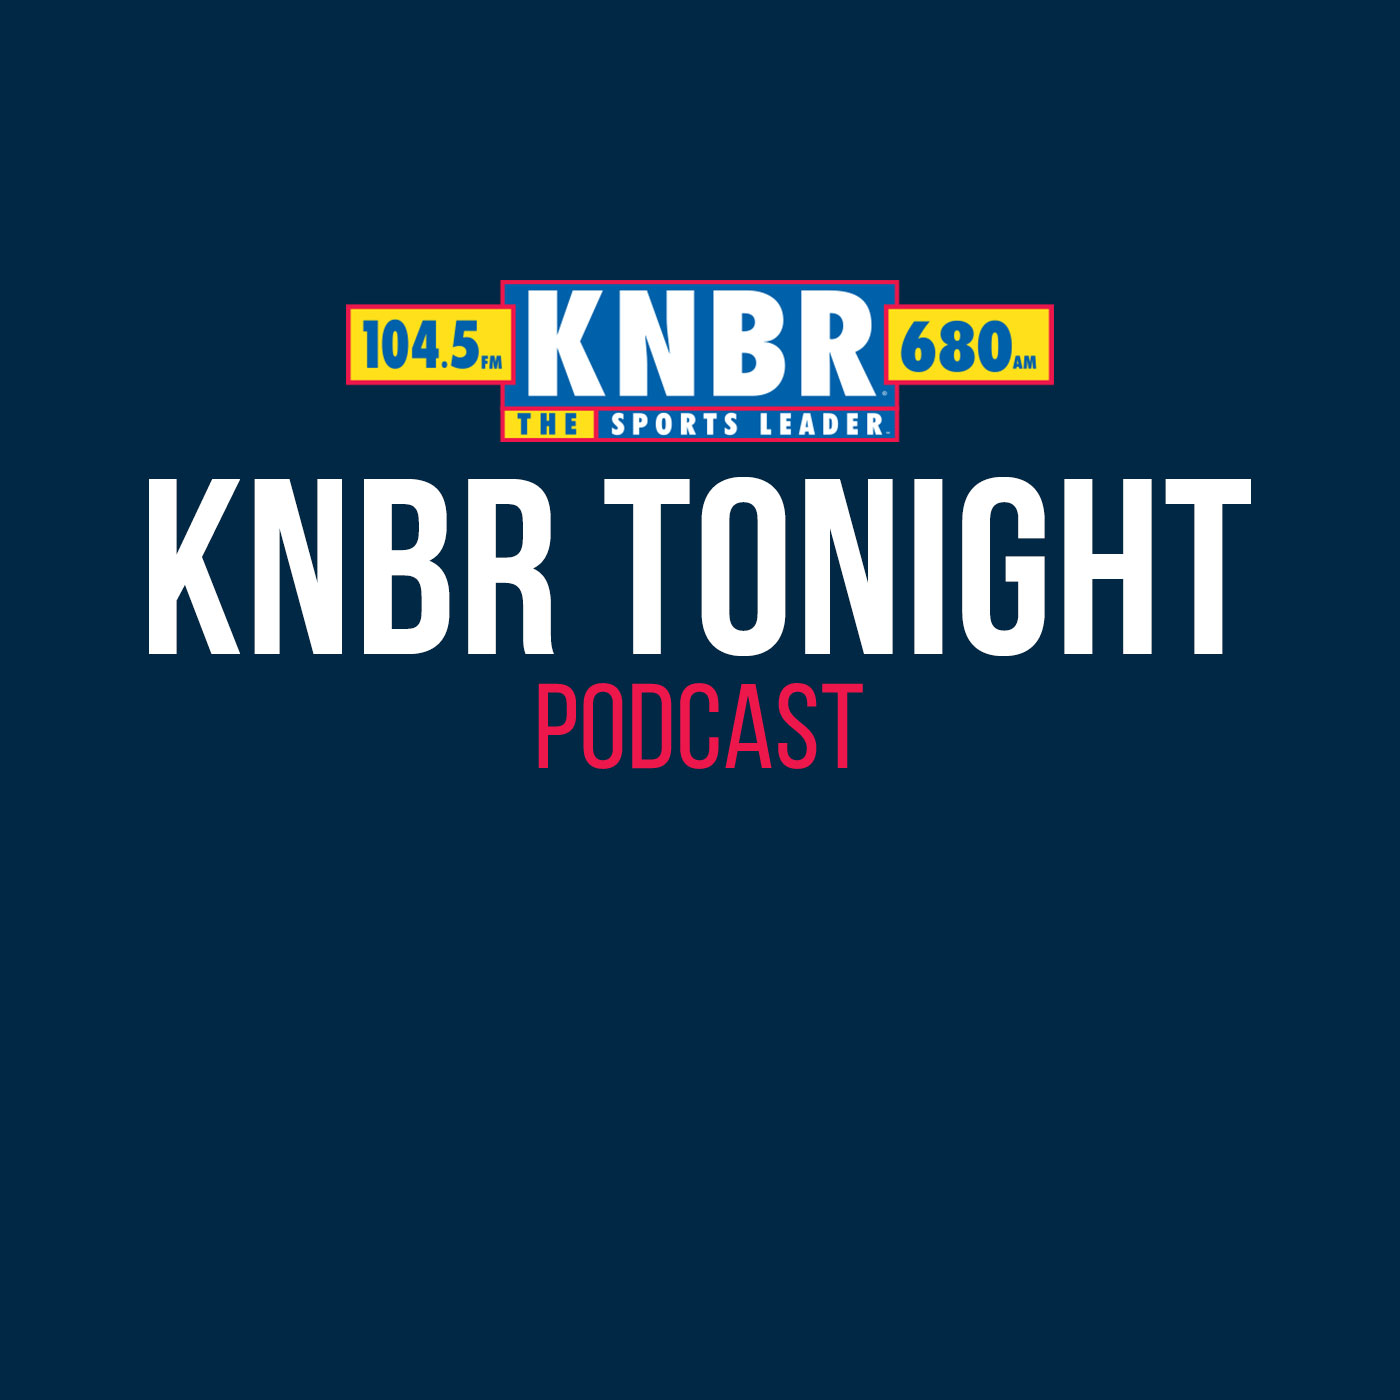 1-21 Tracy Sandler joins KNBR Tonight with Kerry Crowley to discuss if the 49ers need to play a perfect game to beat the Packers in Green Bay